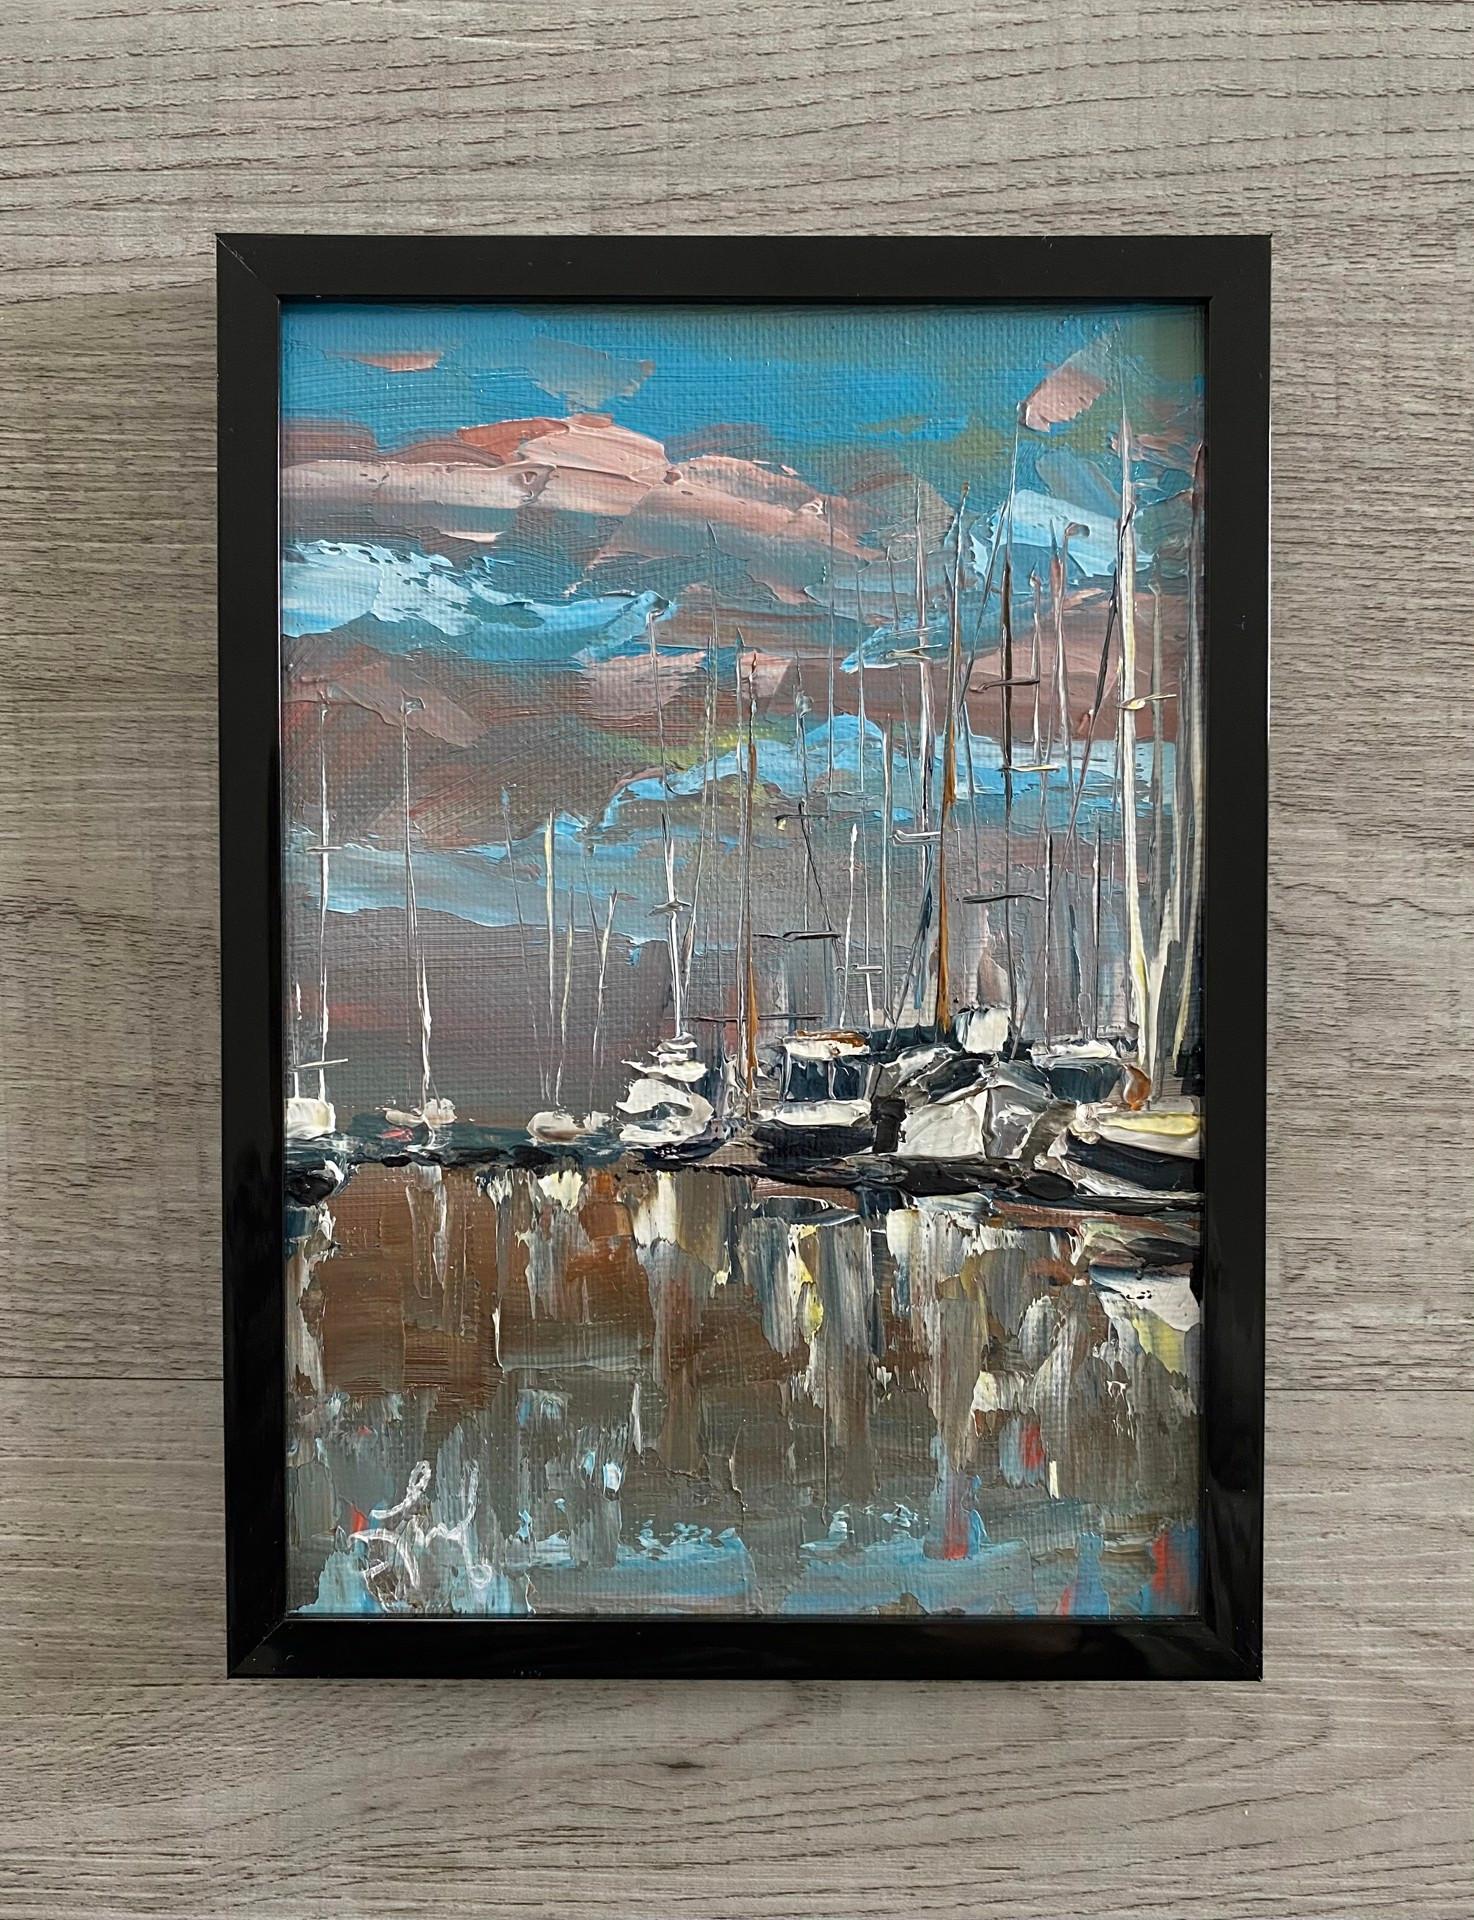 The Docks - Painting by Leigh Ann Van Fossan